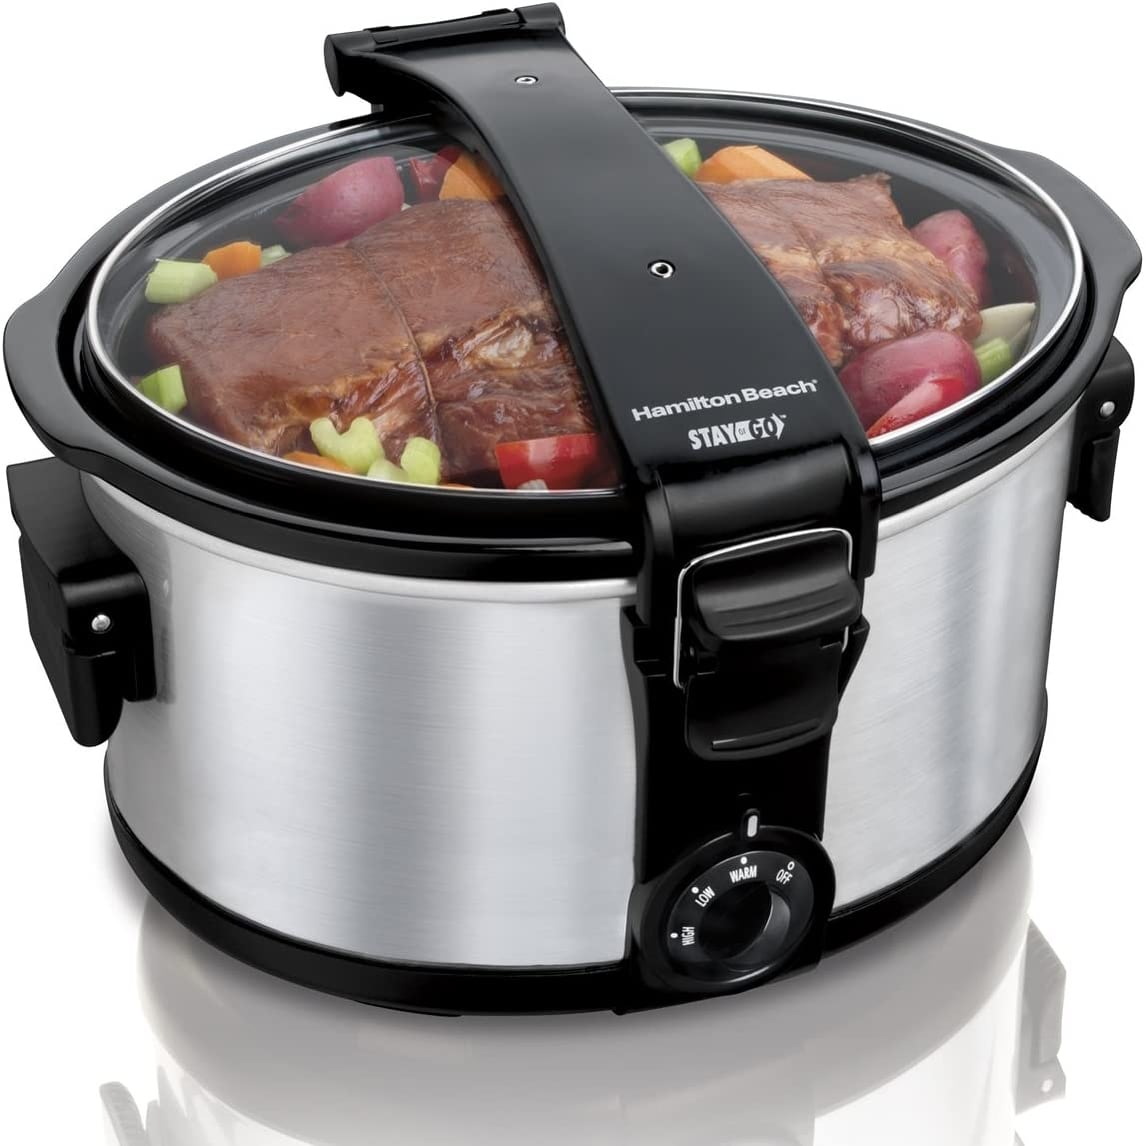 https://ak1.ostkcdn.com/images/products/is/images/direct/fca7249c1ce74a836670dbf43d621372393d1e1e/Stay-or-Go-Portable-7-Quart-Slow-Cooker-with-Lid-Lock-for-Easy-Transport%2C-Dishwasher-Safe-Crock.jpg